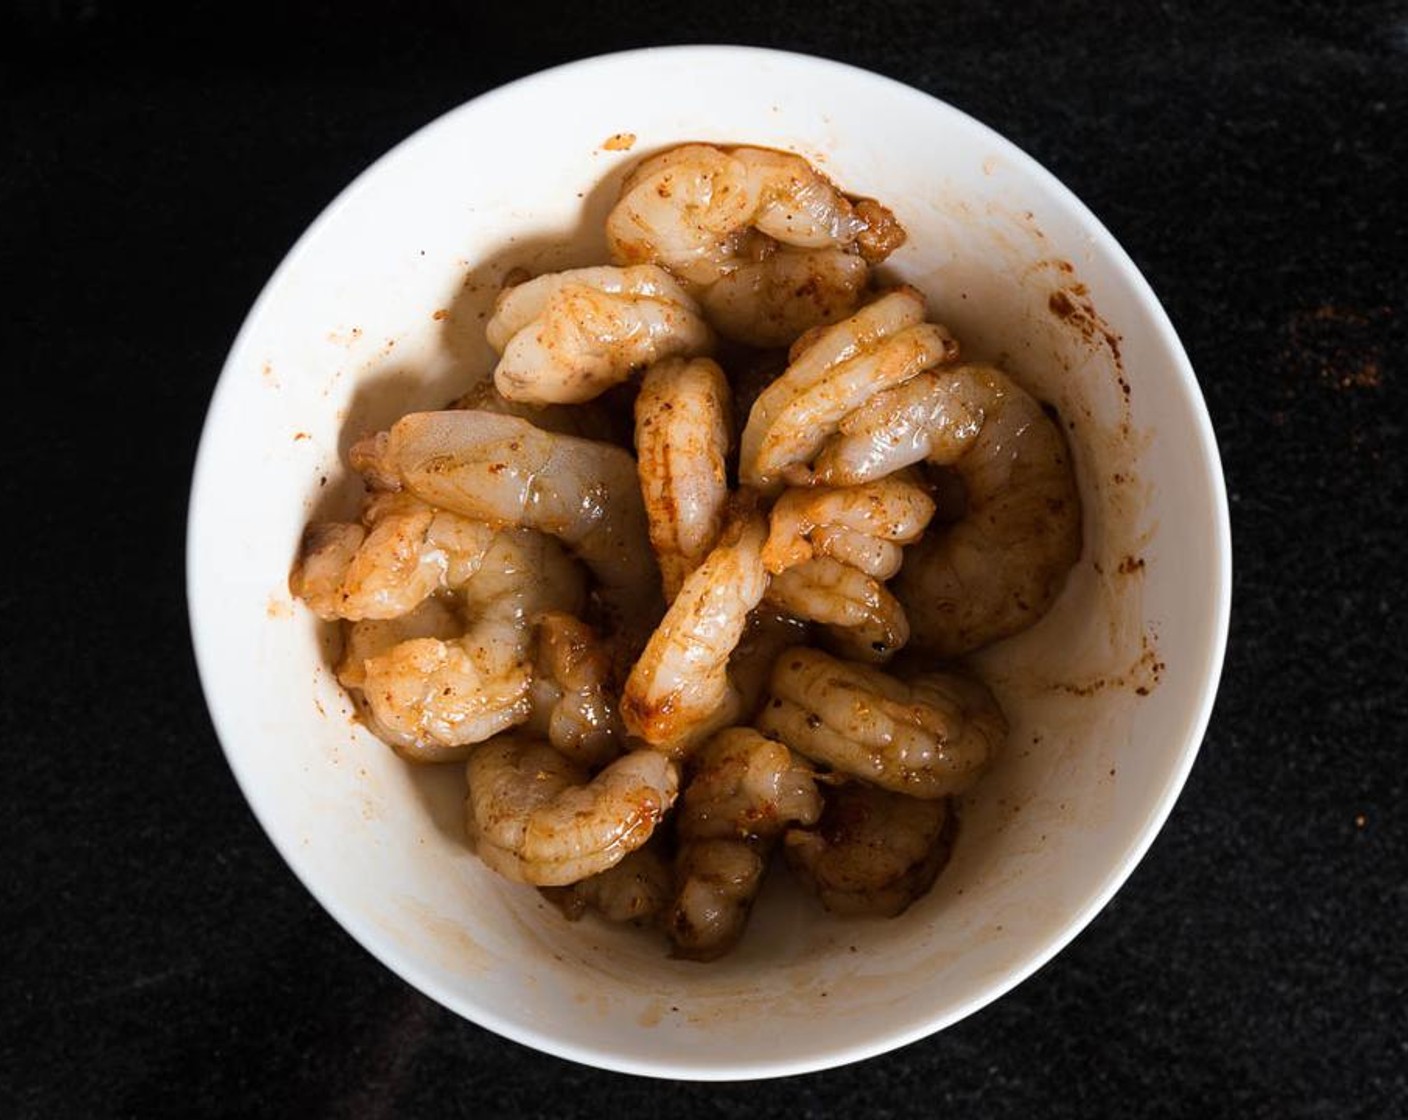 step 2 Mix well and coat shrimp evenly with spices. Let marinate for 10 to 30 minutes.